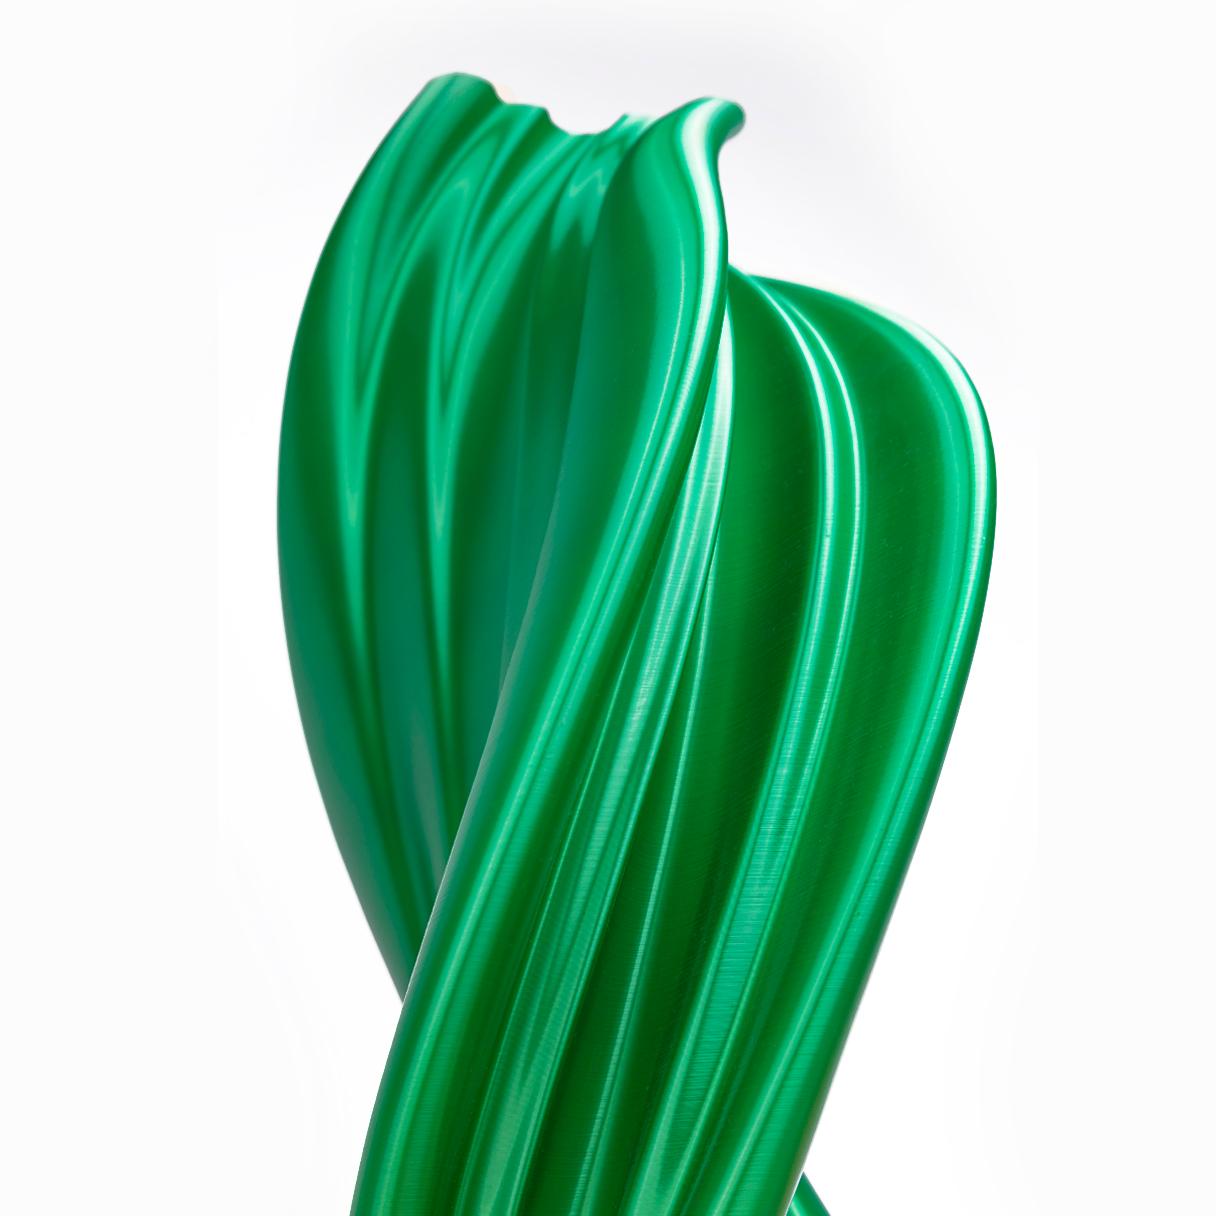 Damocle, Green Contemporary Sustainable Vase-Sculpture For Sale 2